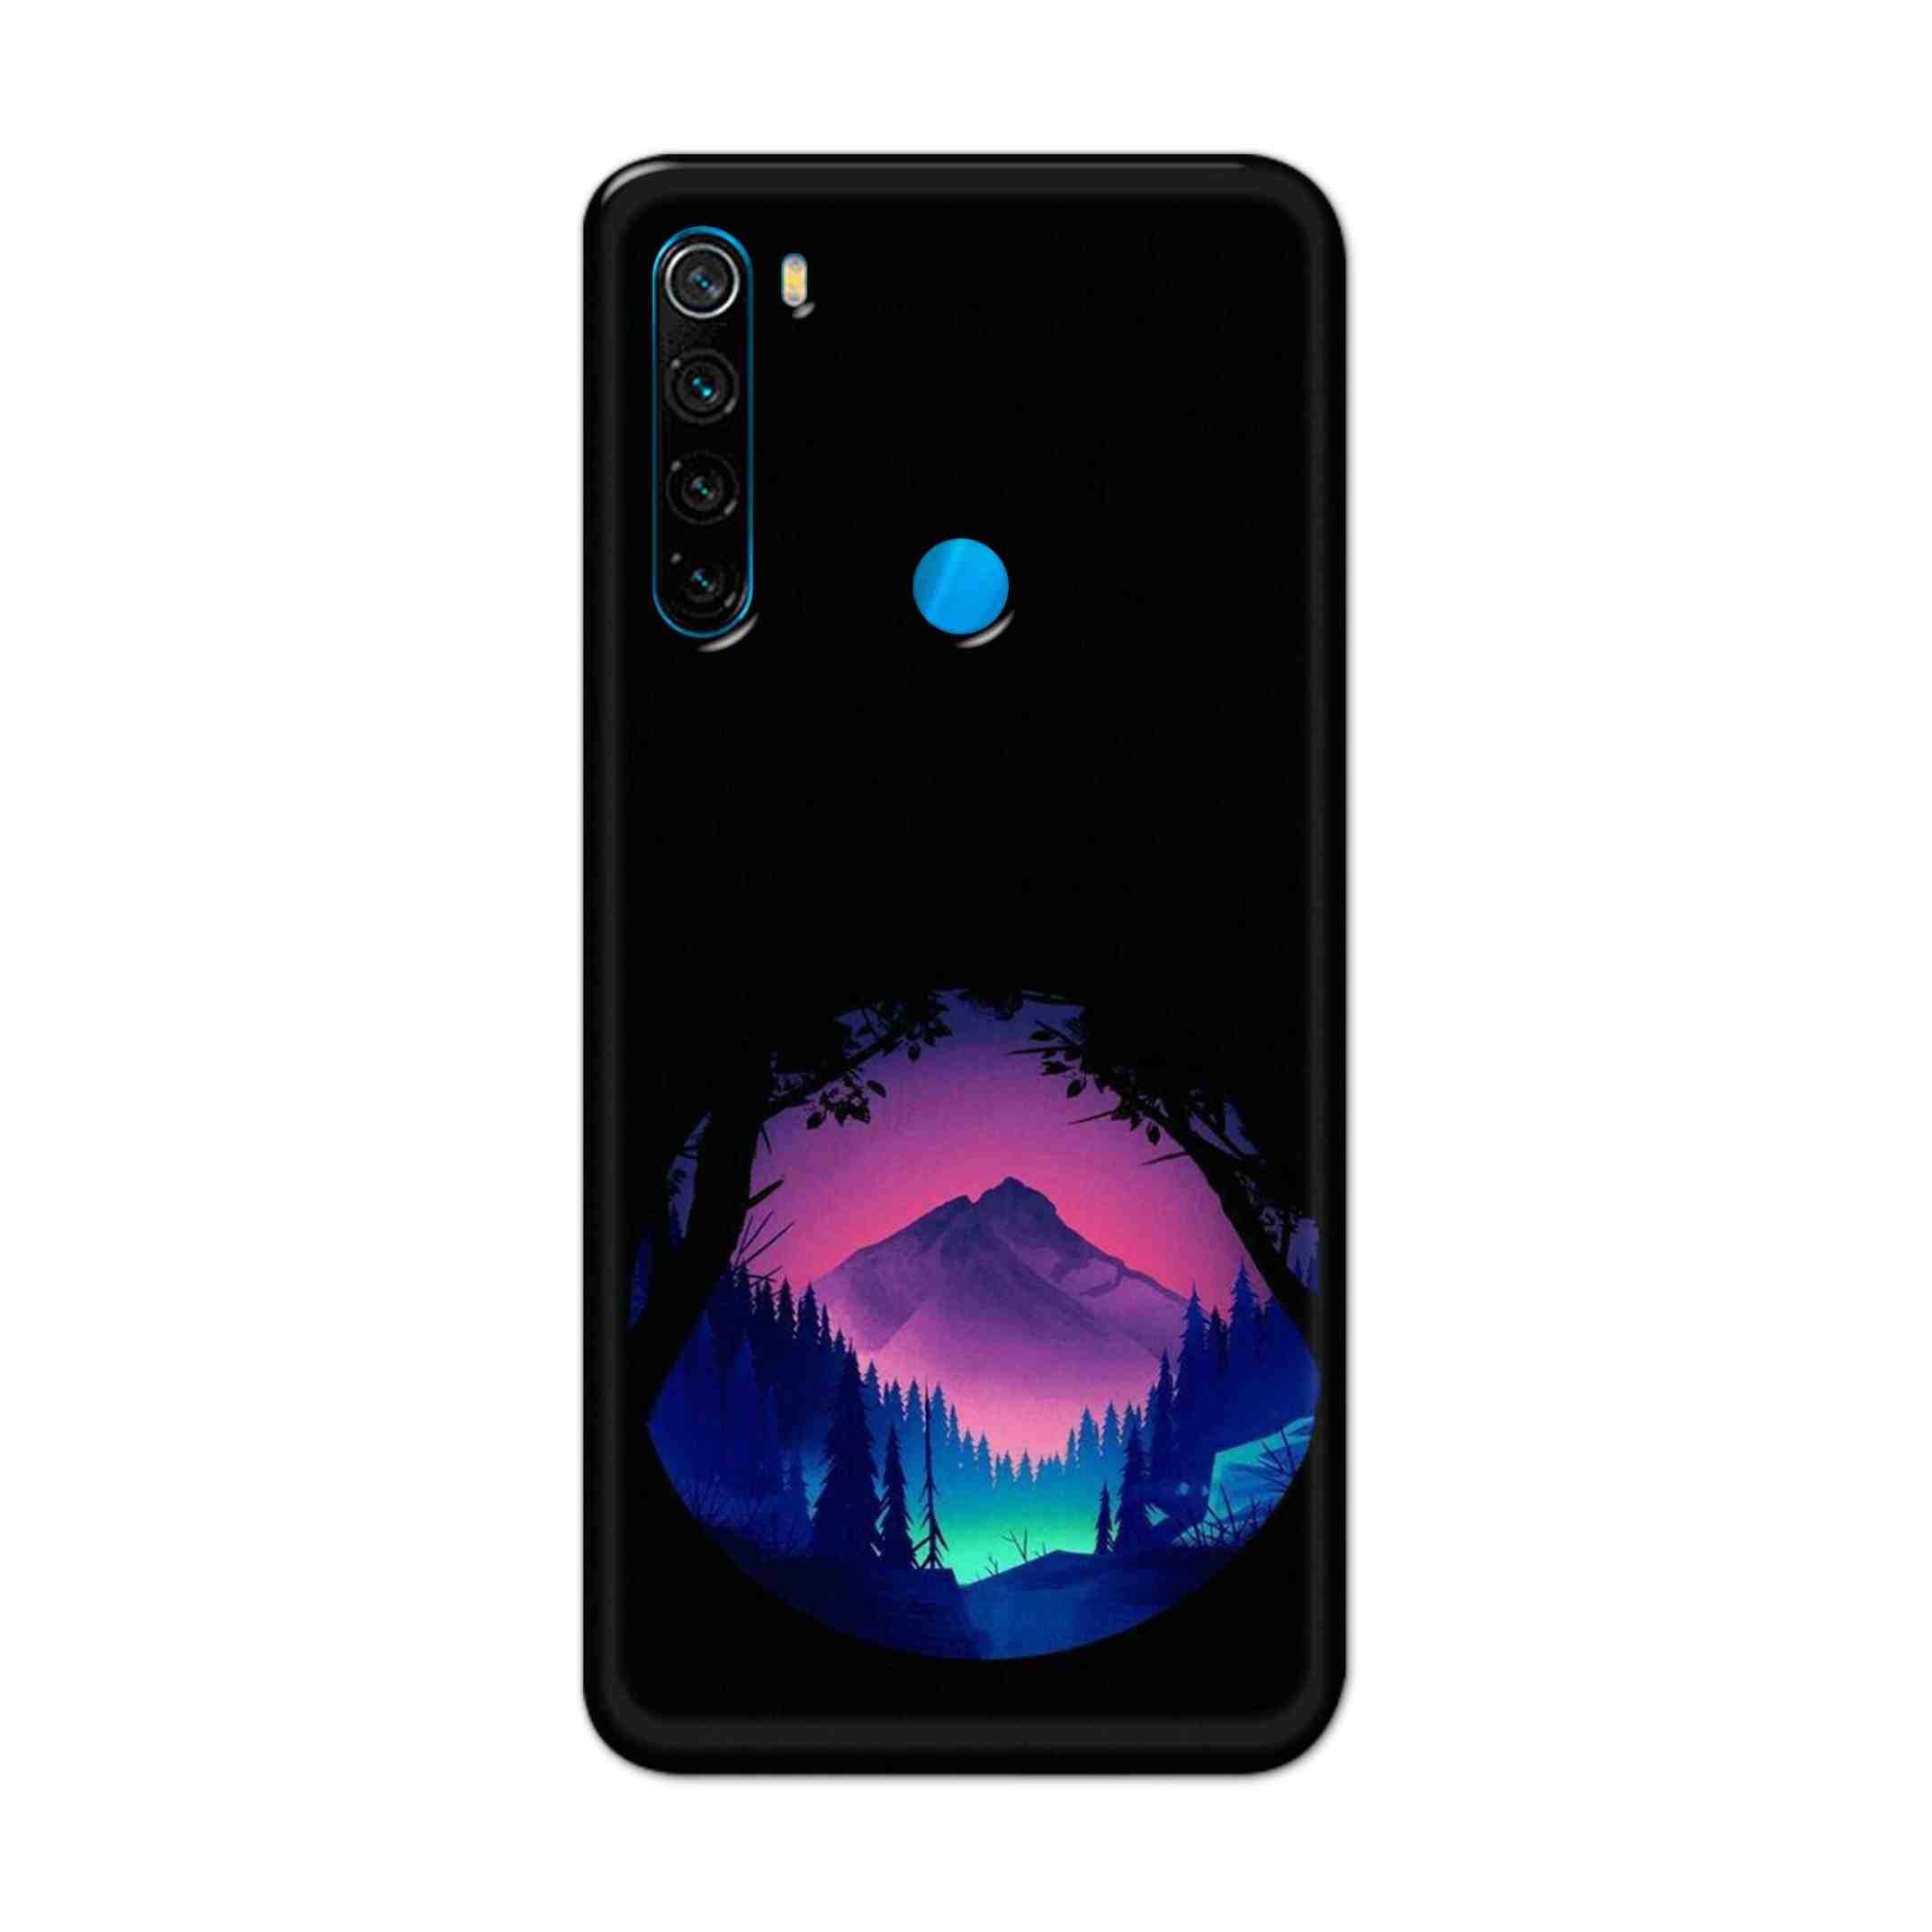 Buy Neon Tables Hard Back Mobile Phone Case Cover For Xiaomi Redmi Note 8 Online